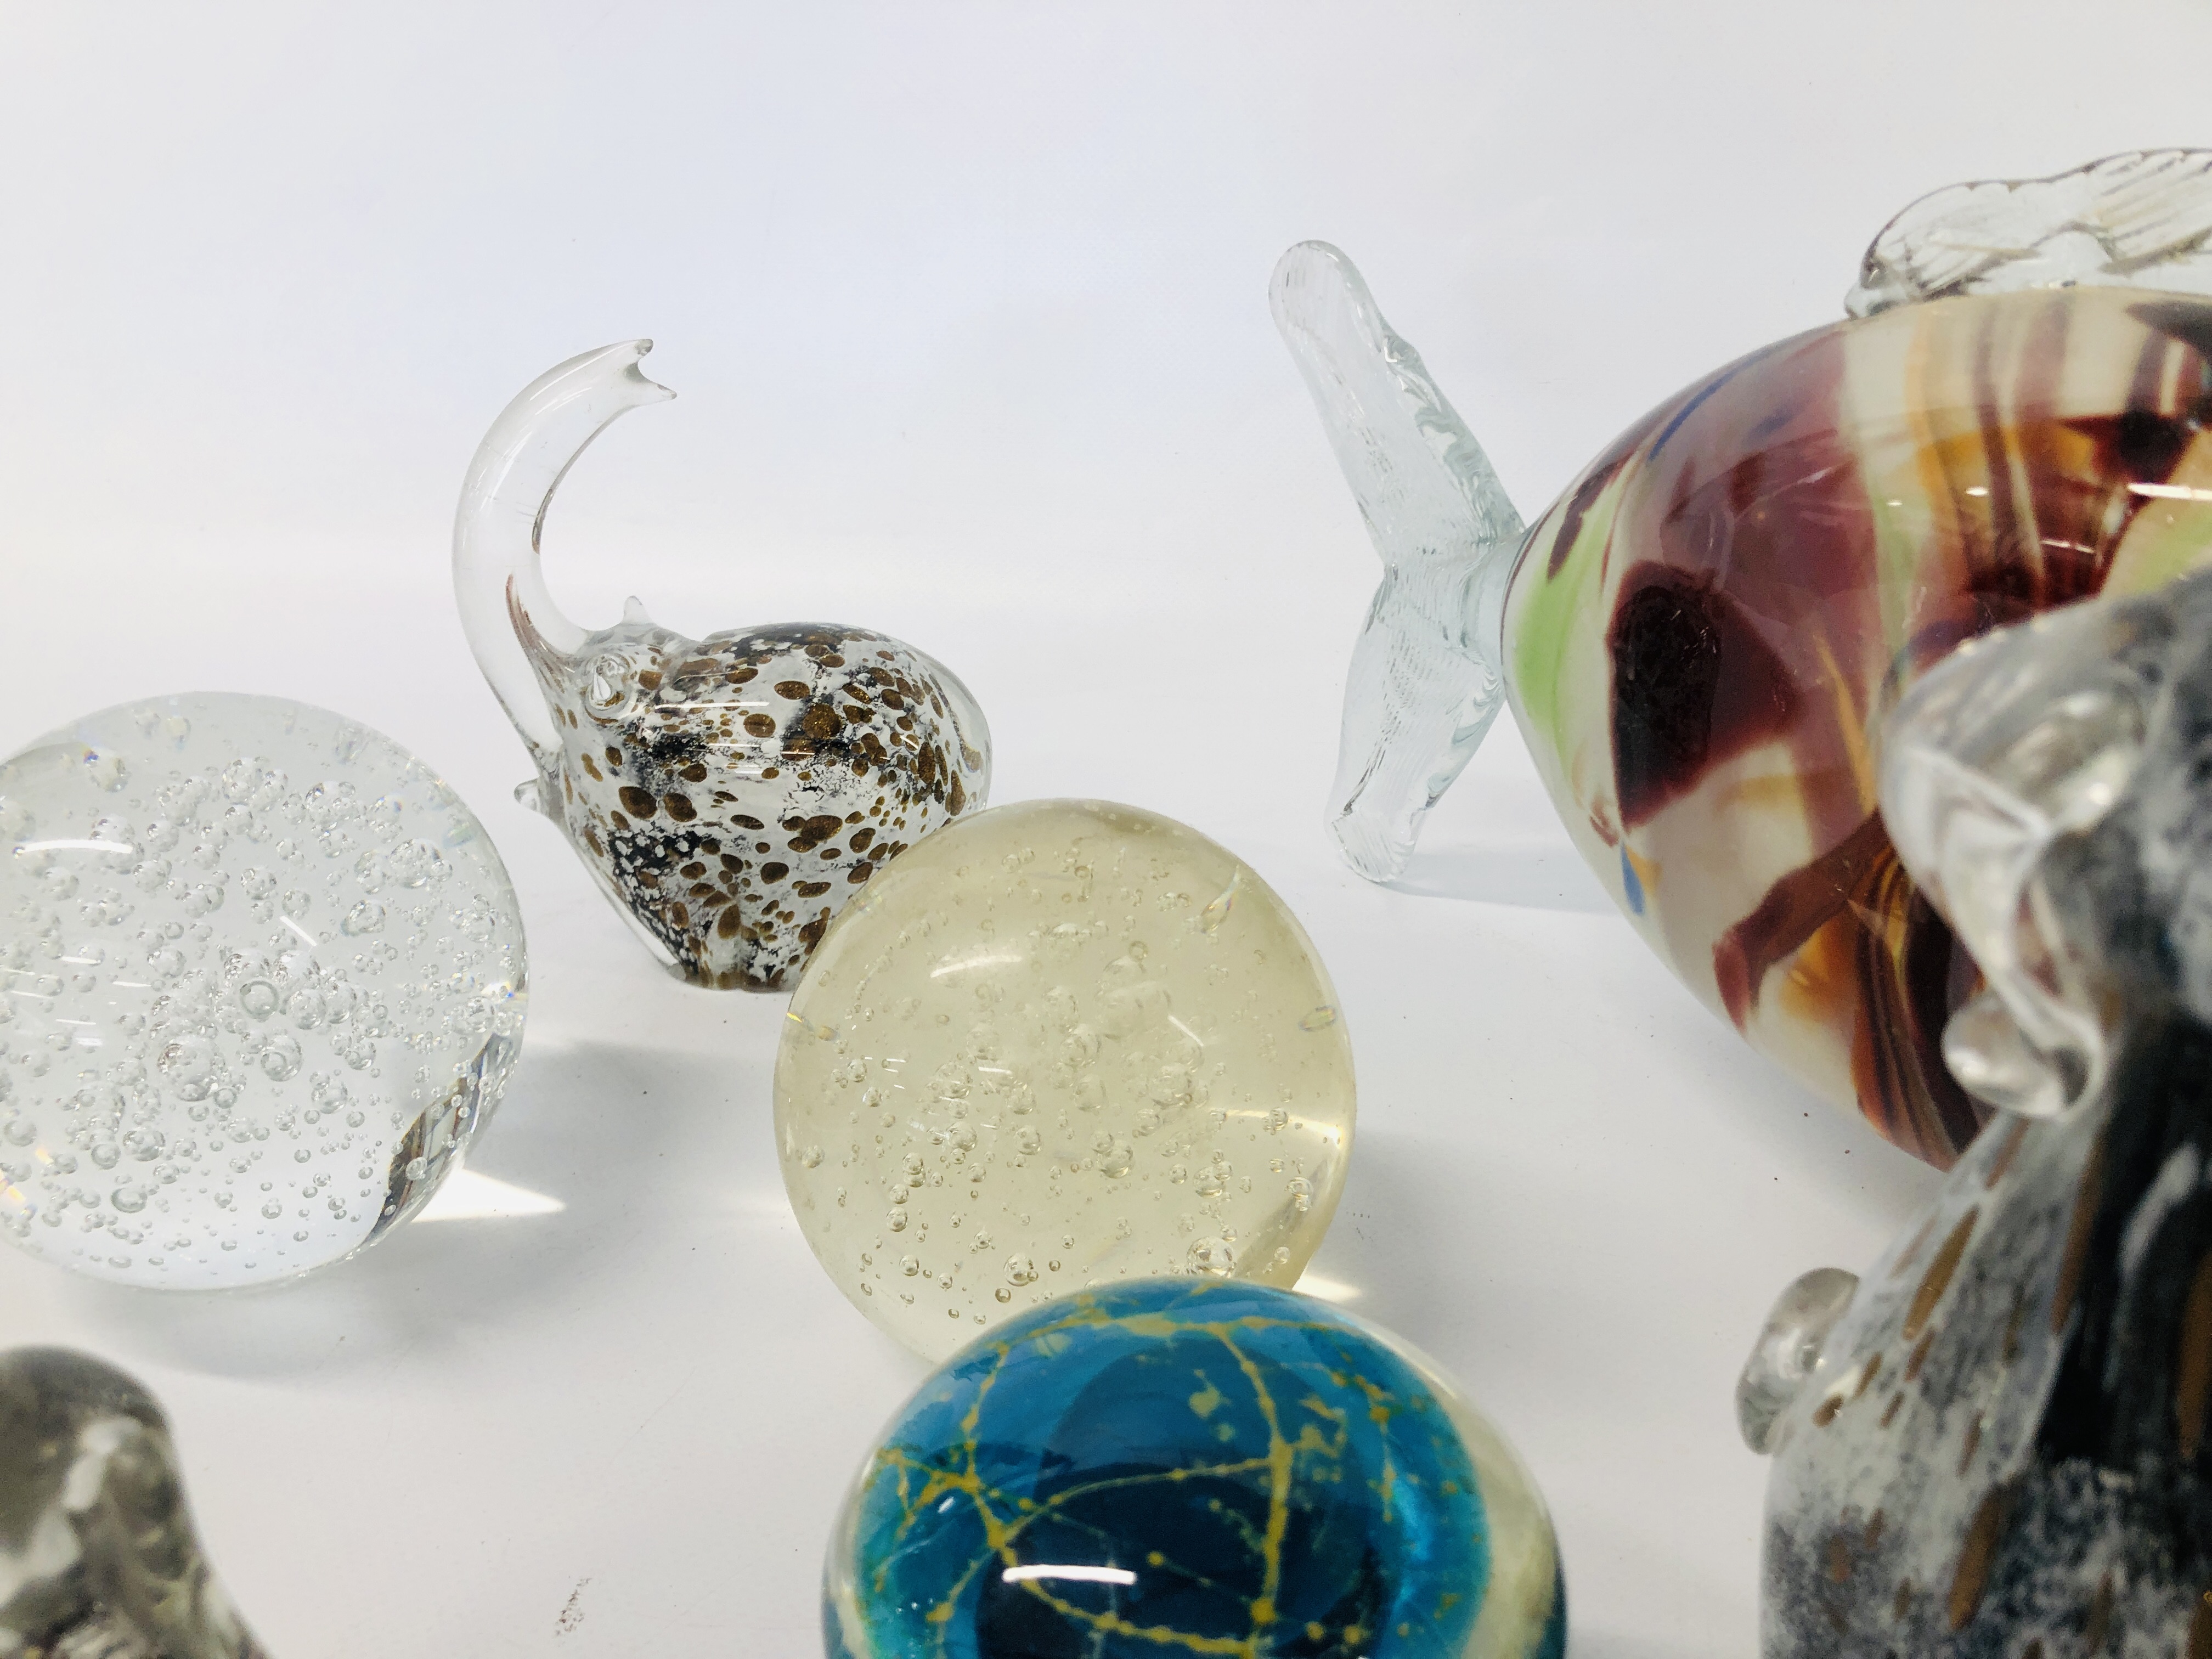 COLLECTION OF ART GLASS PAPERWEIGHTS TO INCLUDE MADINA MUSHROOMS AND AN ART GLASS MURANO STYLE FISH - Image 4 of 6